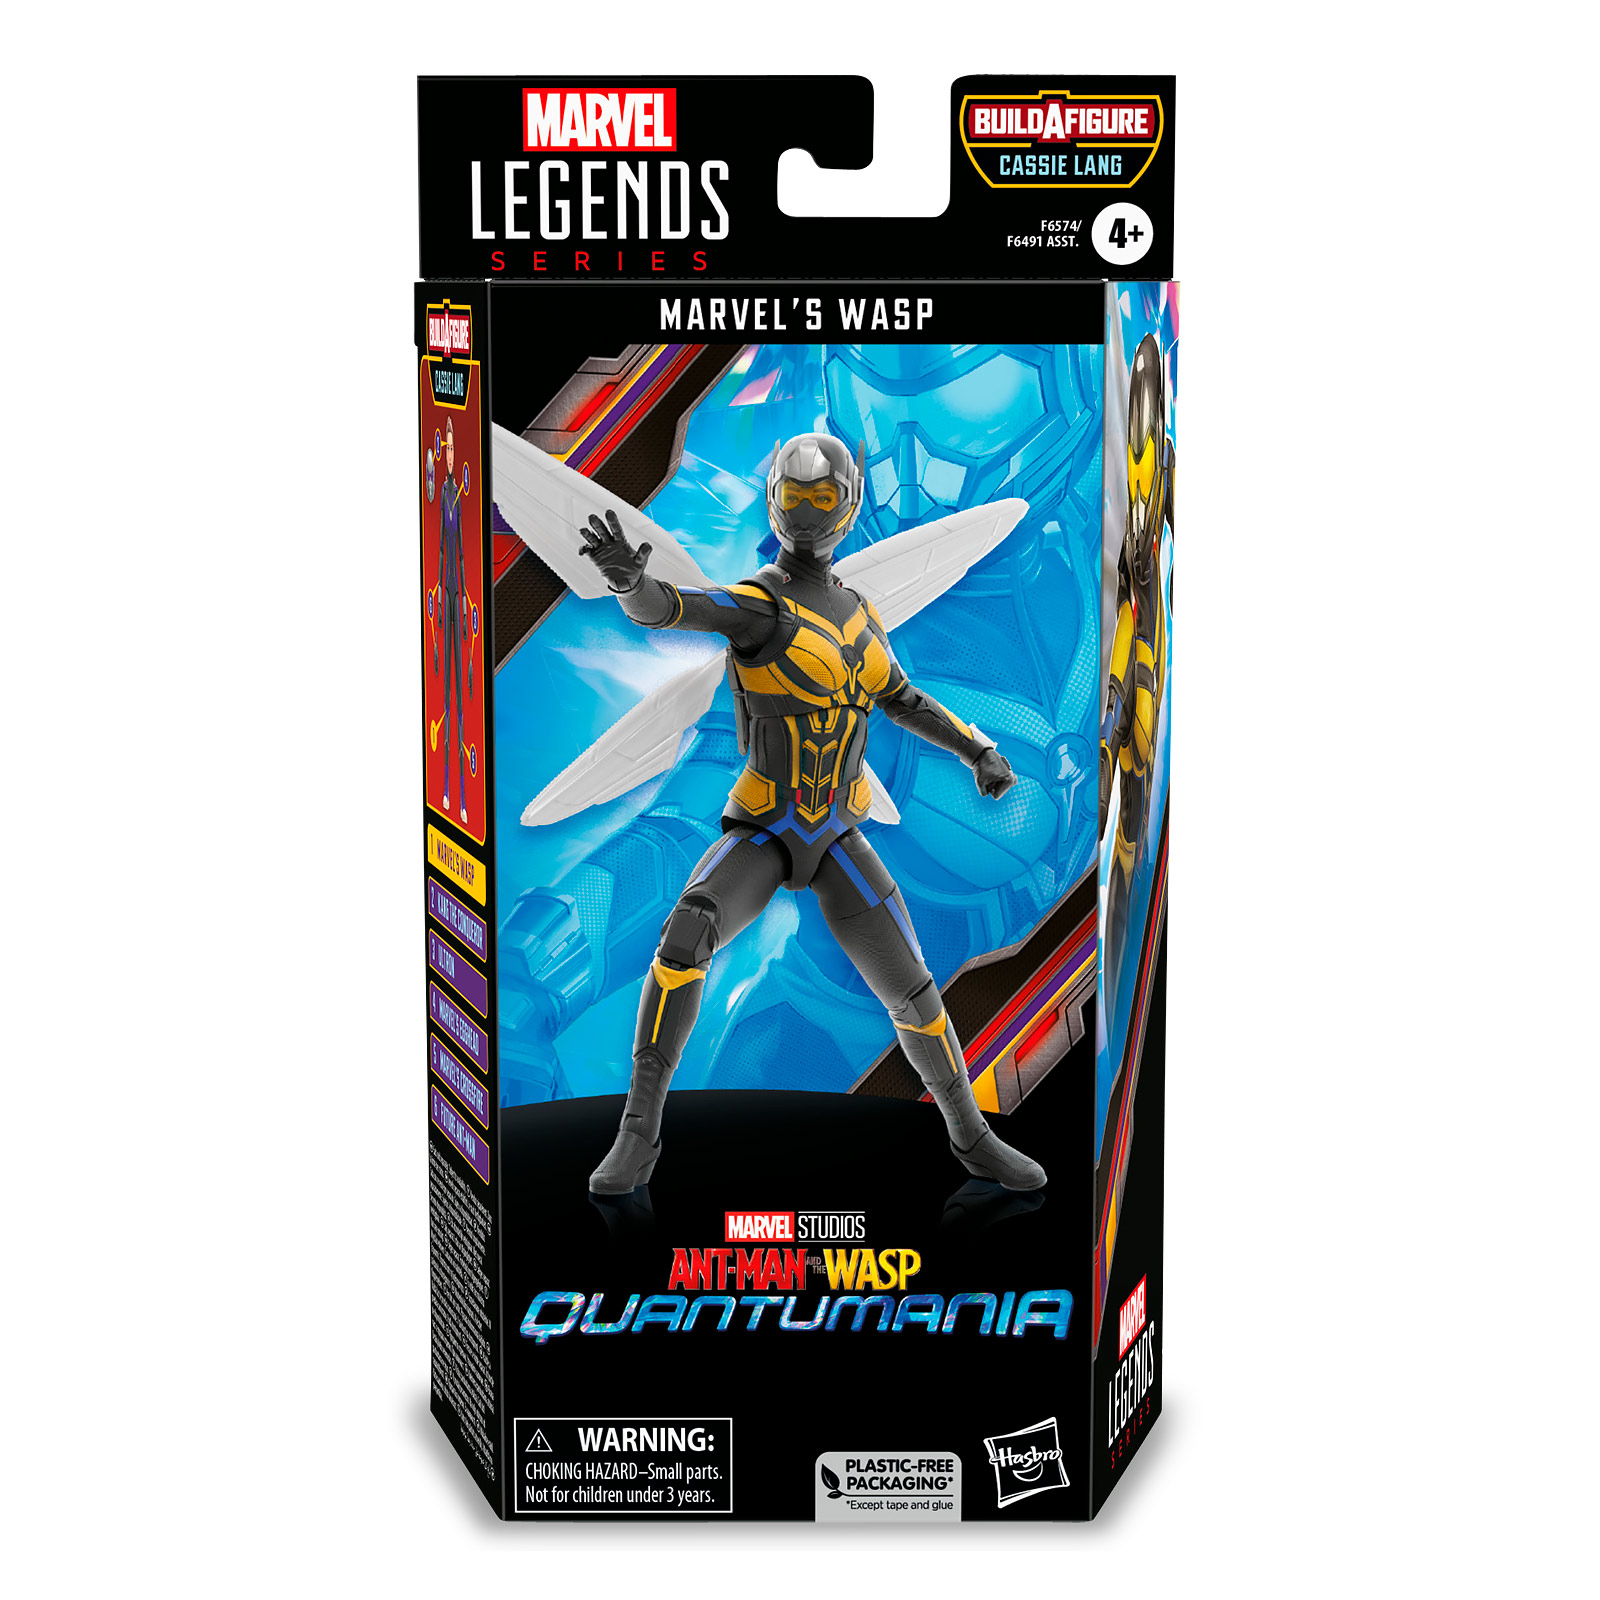 Ant-Man and the Wasp - Marvel's Wasp Quantumania Action Figure